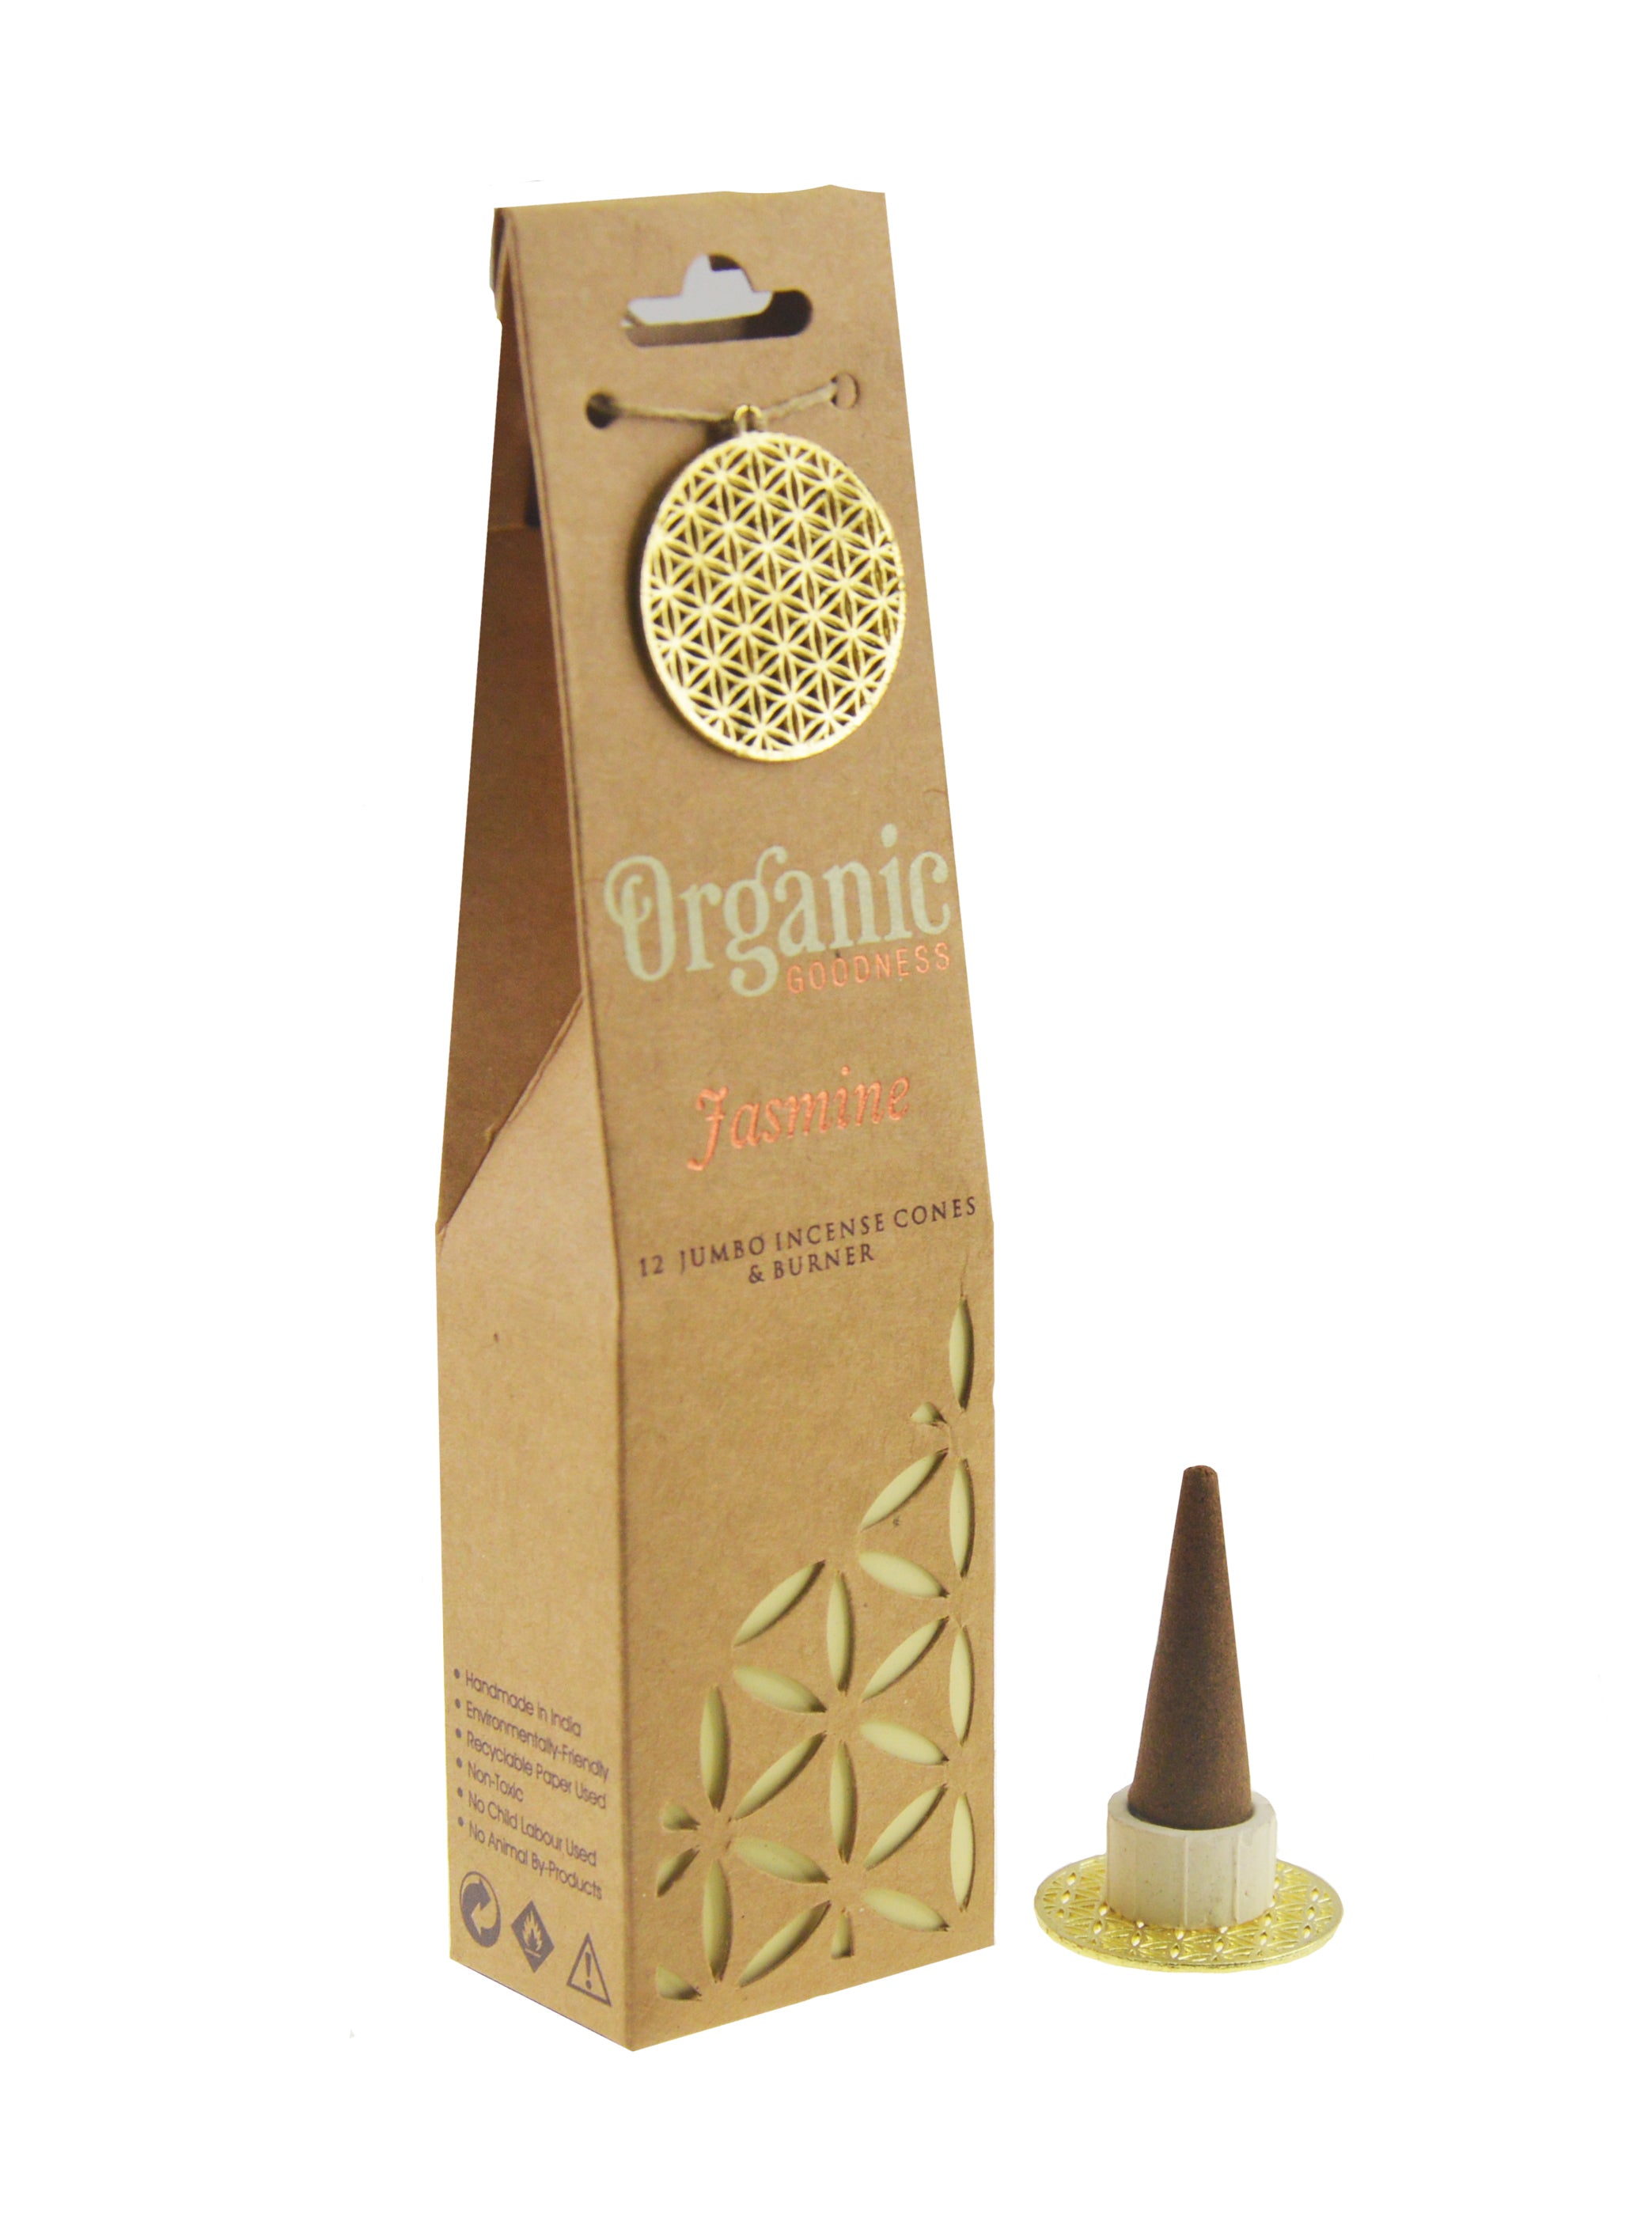 Song of India Jasmine Organic Goodness Incense Cones Set of 12